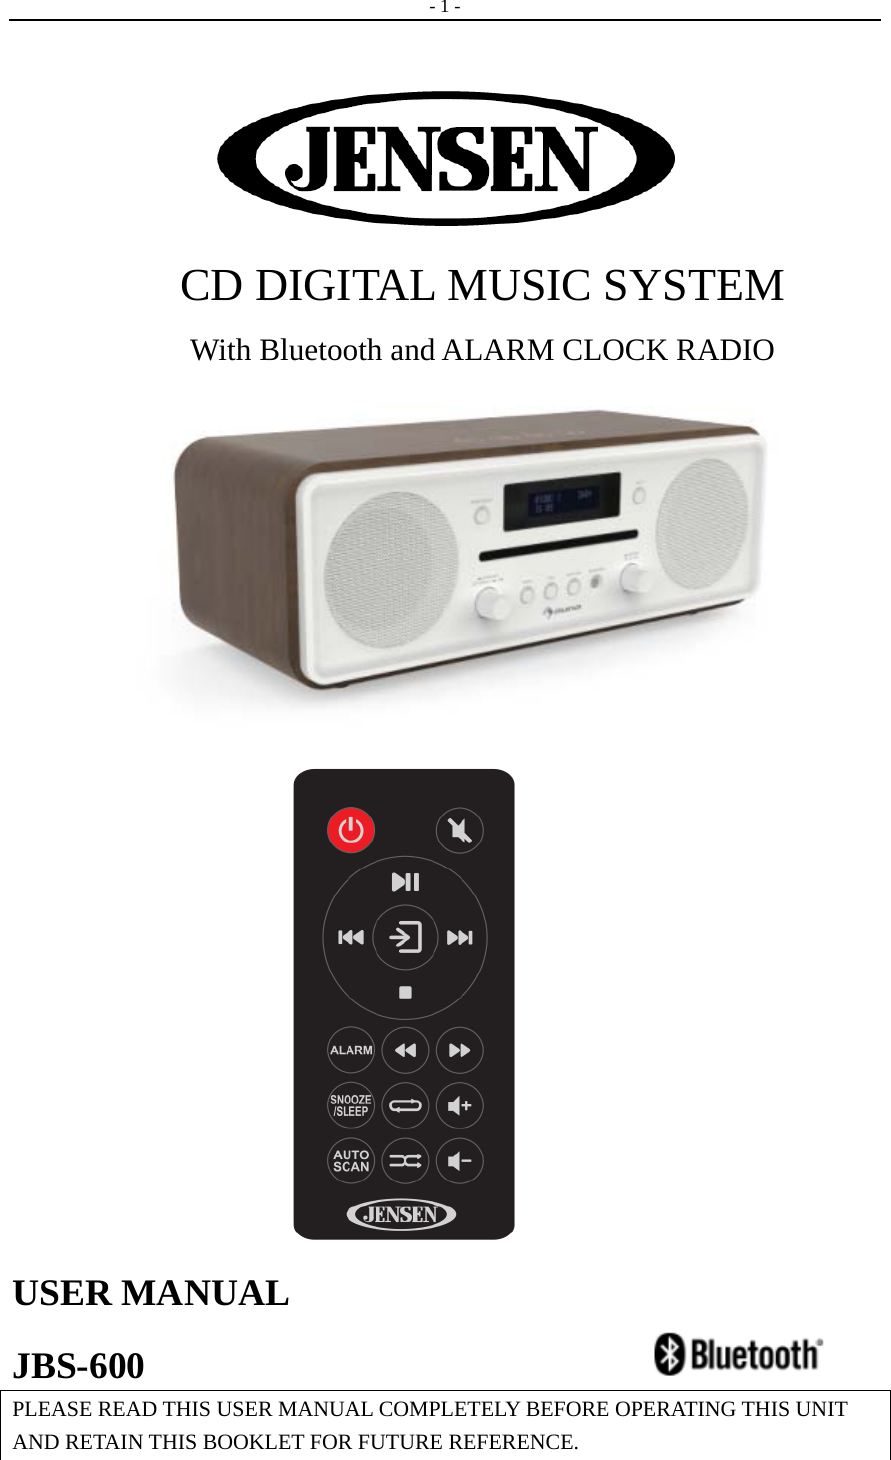   - 1 -    CD DIGITAL MUSIC SYSTEM   With Bluetooth and ALARM CLOCK RADIO                           USER MANUAL   JBS-600                         PLEASE READ THIS USER MANUAL COMPLETELY BEFORE OPERATING THIS UNIT AND RETAIN THIS BOOKLET FOR FUTURE REFERENCE.  